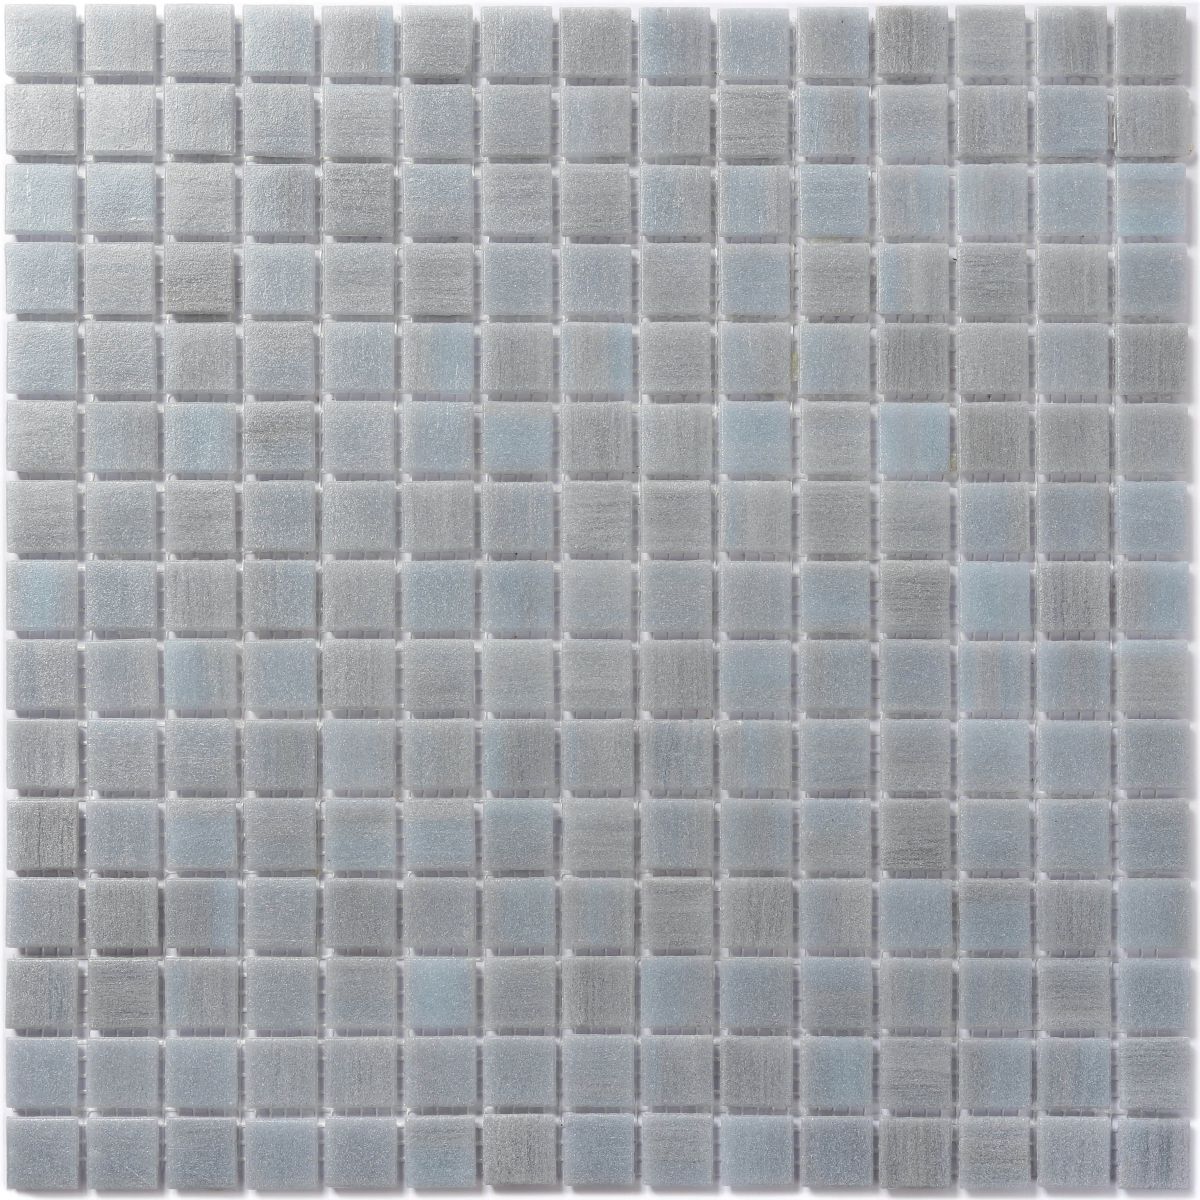 Hot-Melted Texture Fine Moss Glass Square Dark Grey Mosaic Tile 